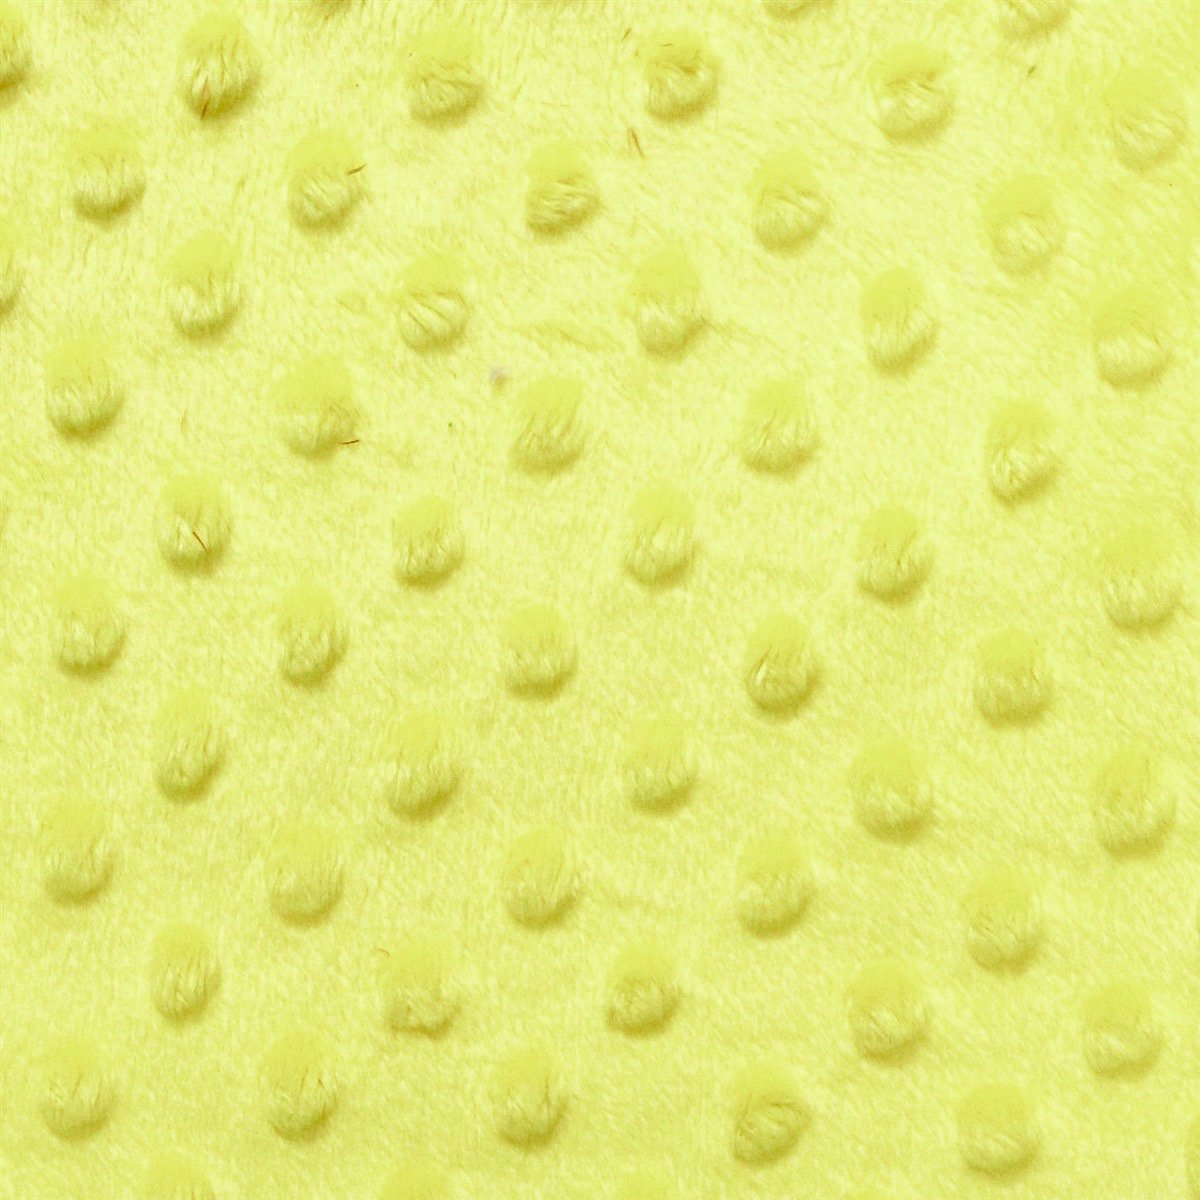 Alison YELLOW Embossed Dimple Dots Soft Velvety Faux Fur Fabric by the Yard - 10090